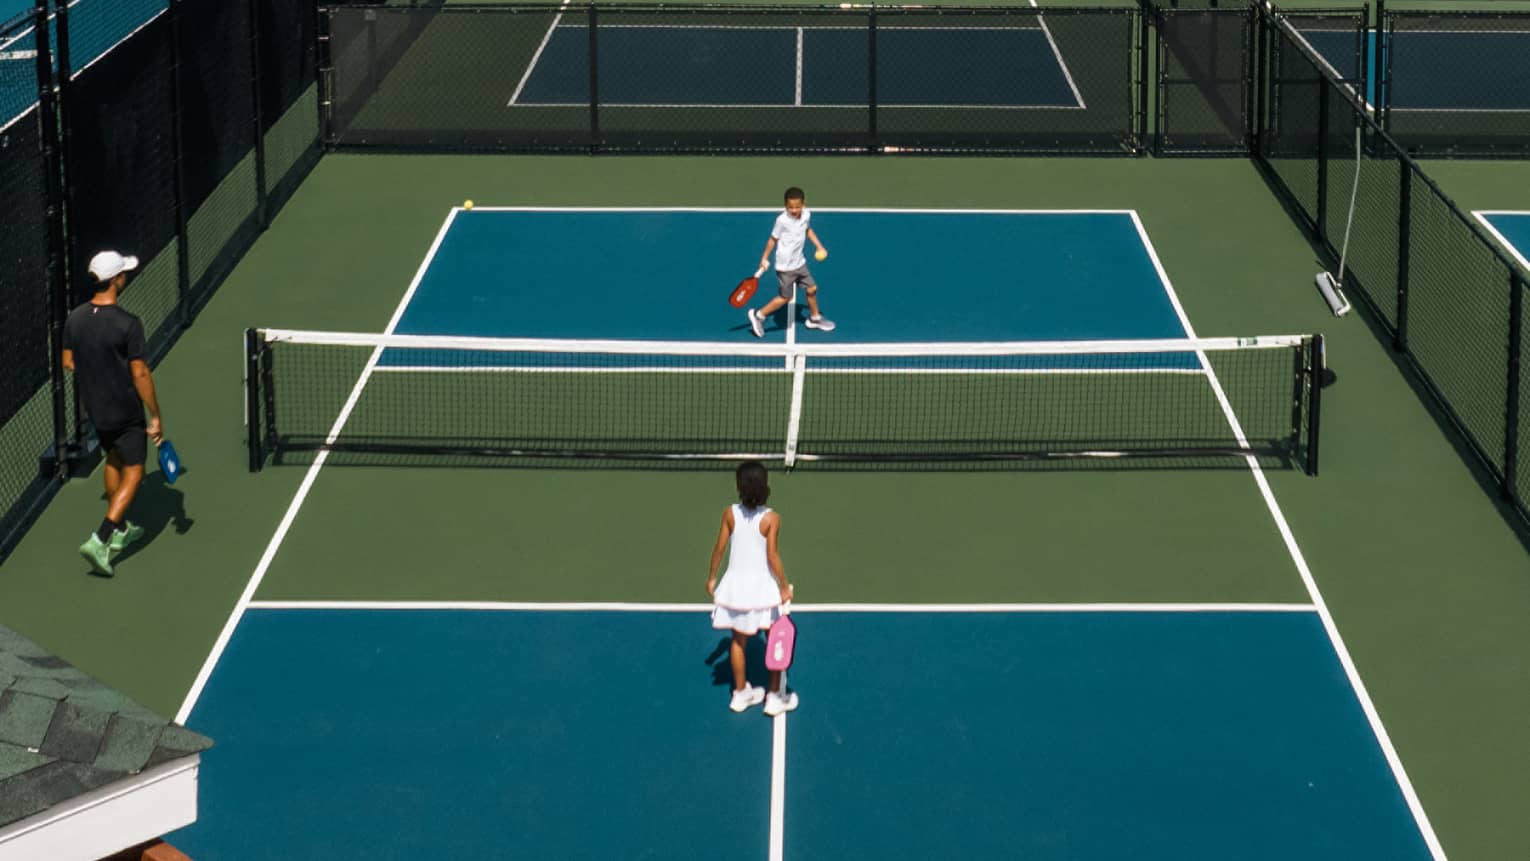 A tennis court with players on it.